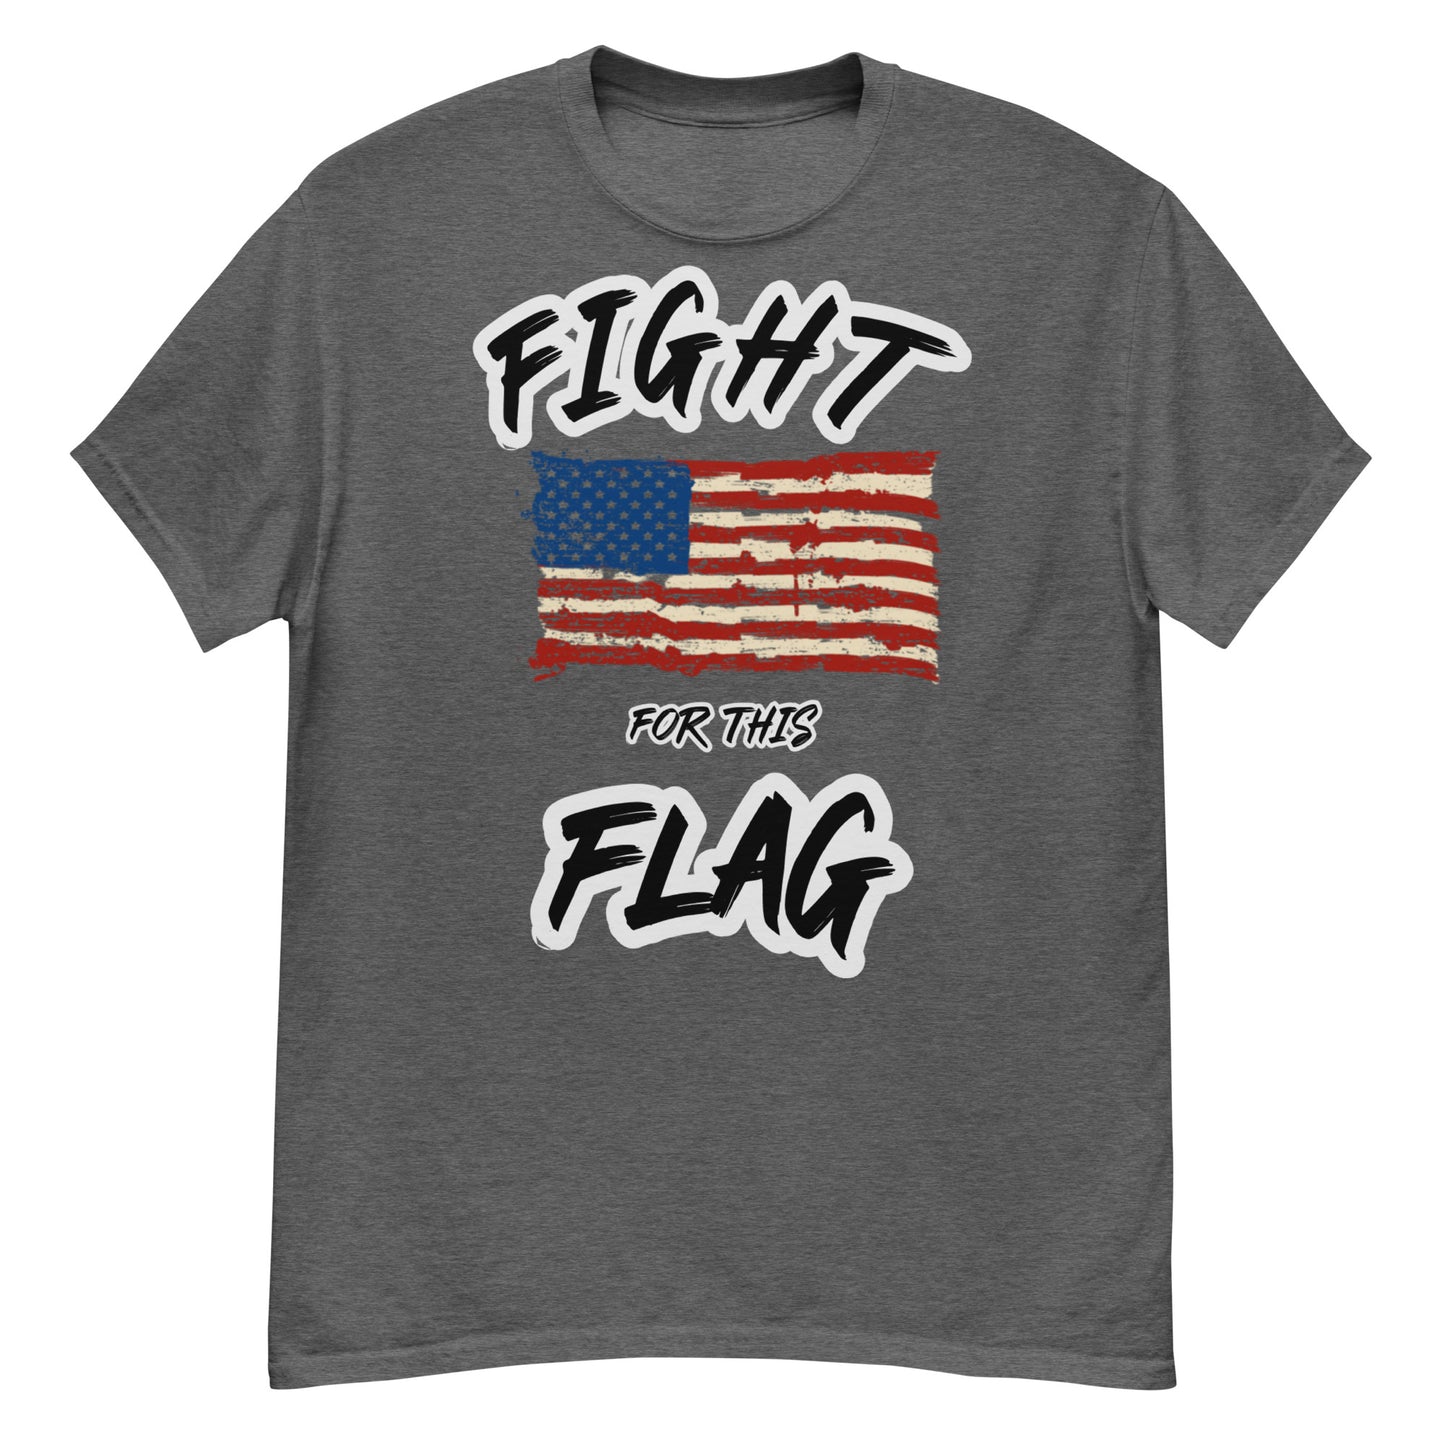 Fight for this Flag - classic tee (gray outline)